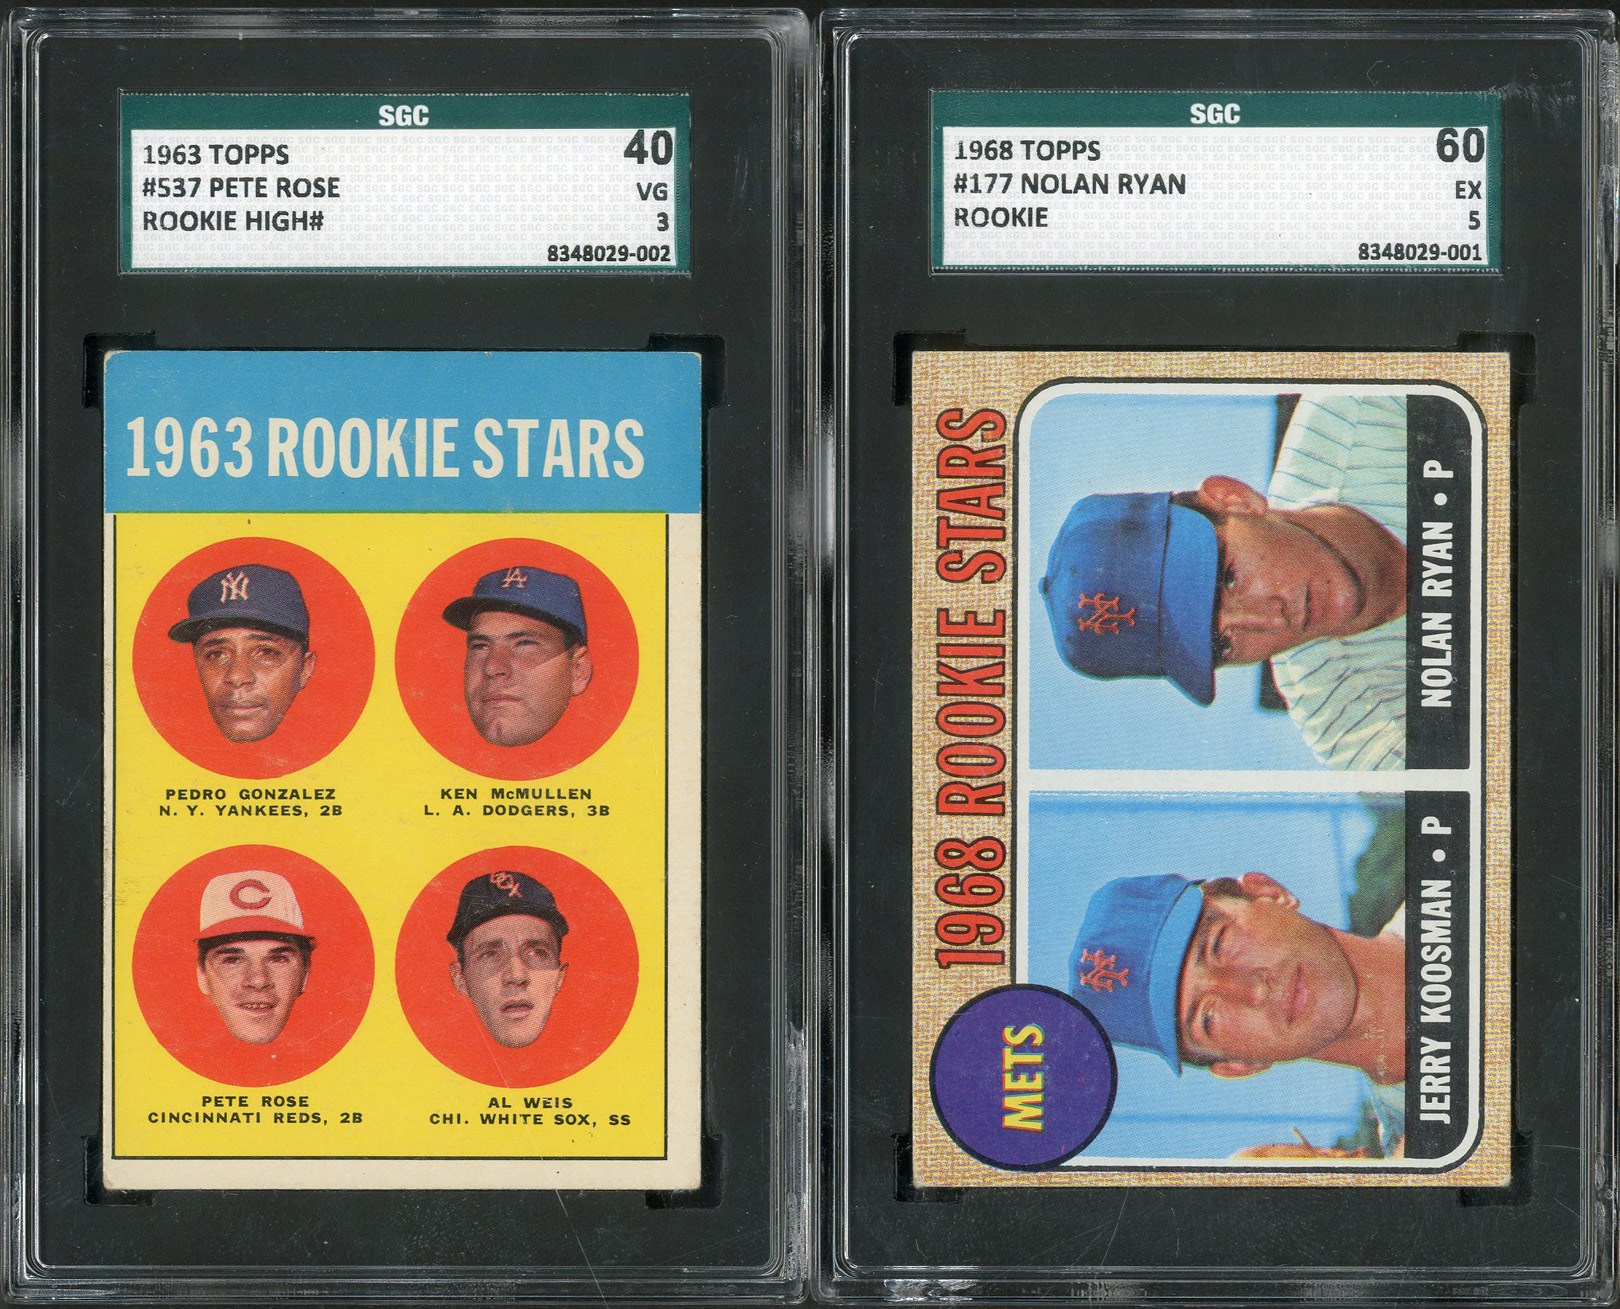 1960-70 Topps Collection of Eight Partial and Near-Sets including SIX Mantle Cards!